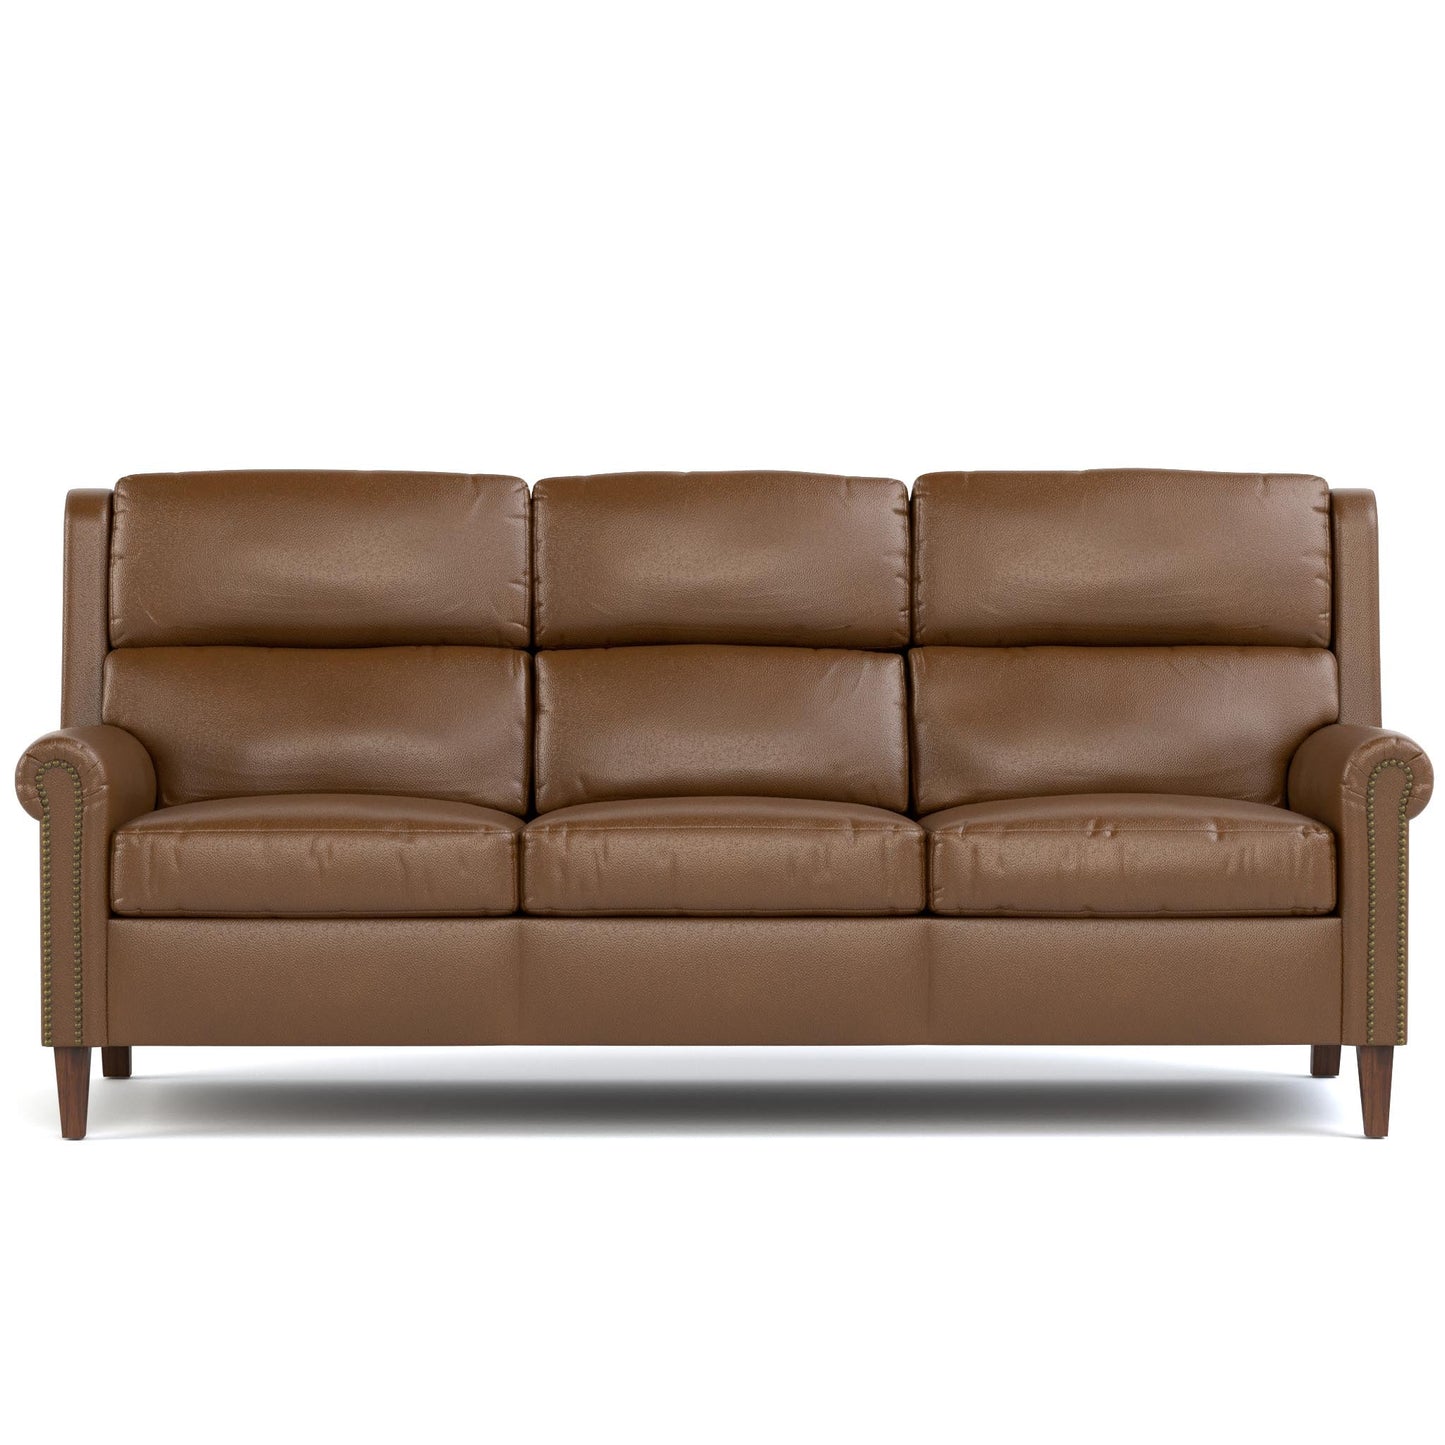 Woodlands Small Roll Arm Sofa with Nails Selvano Bark - Front